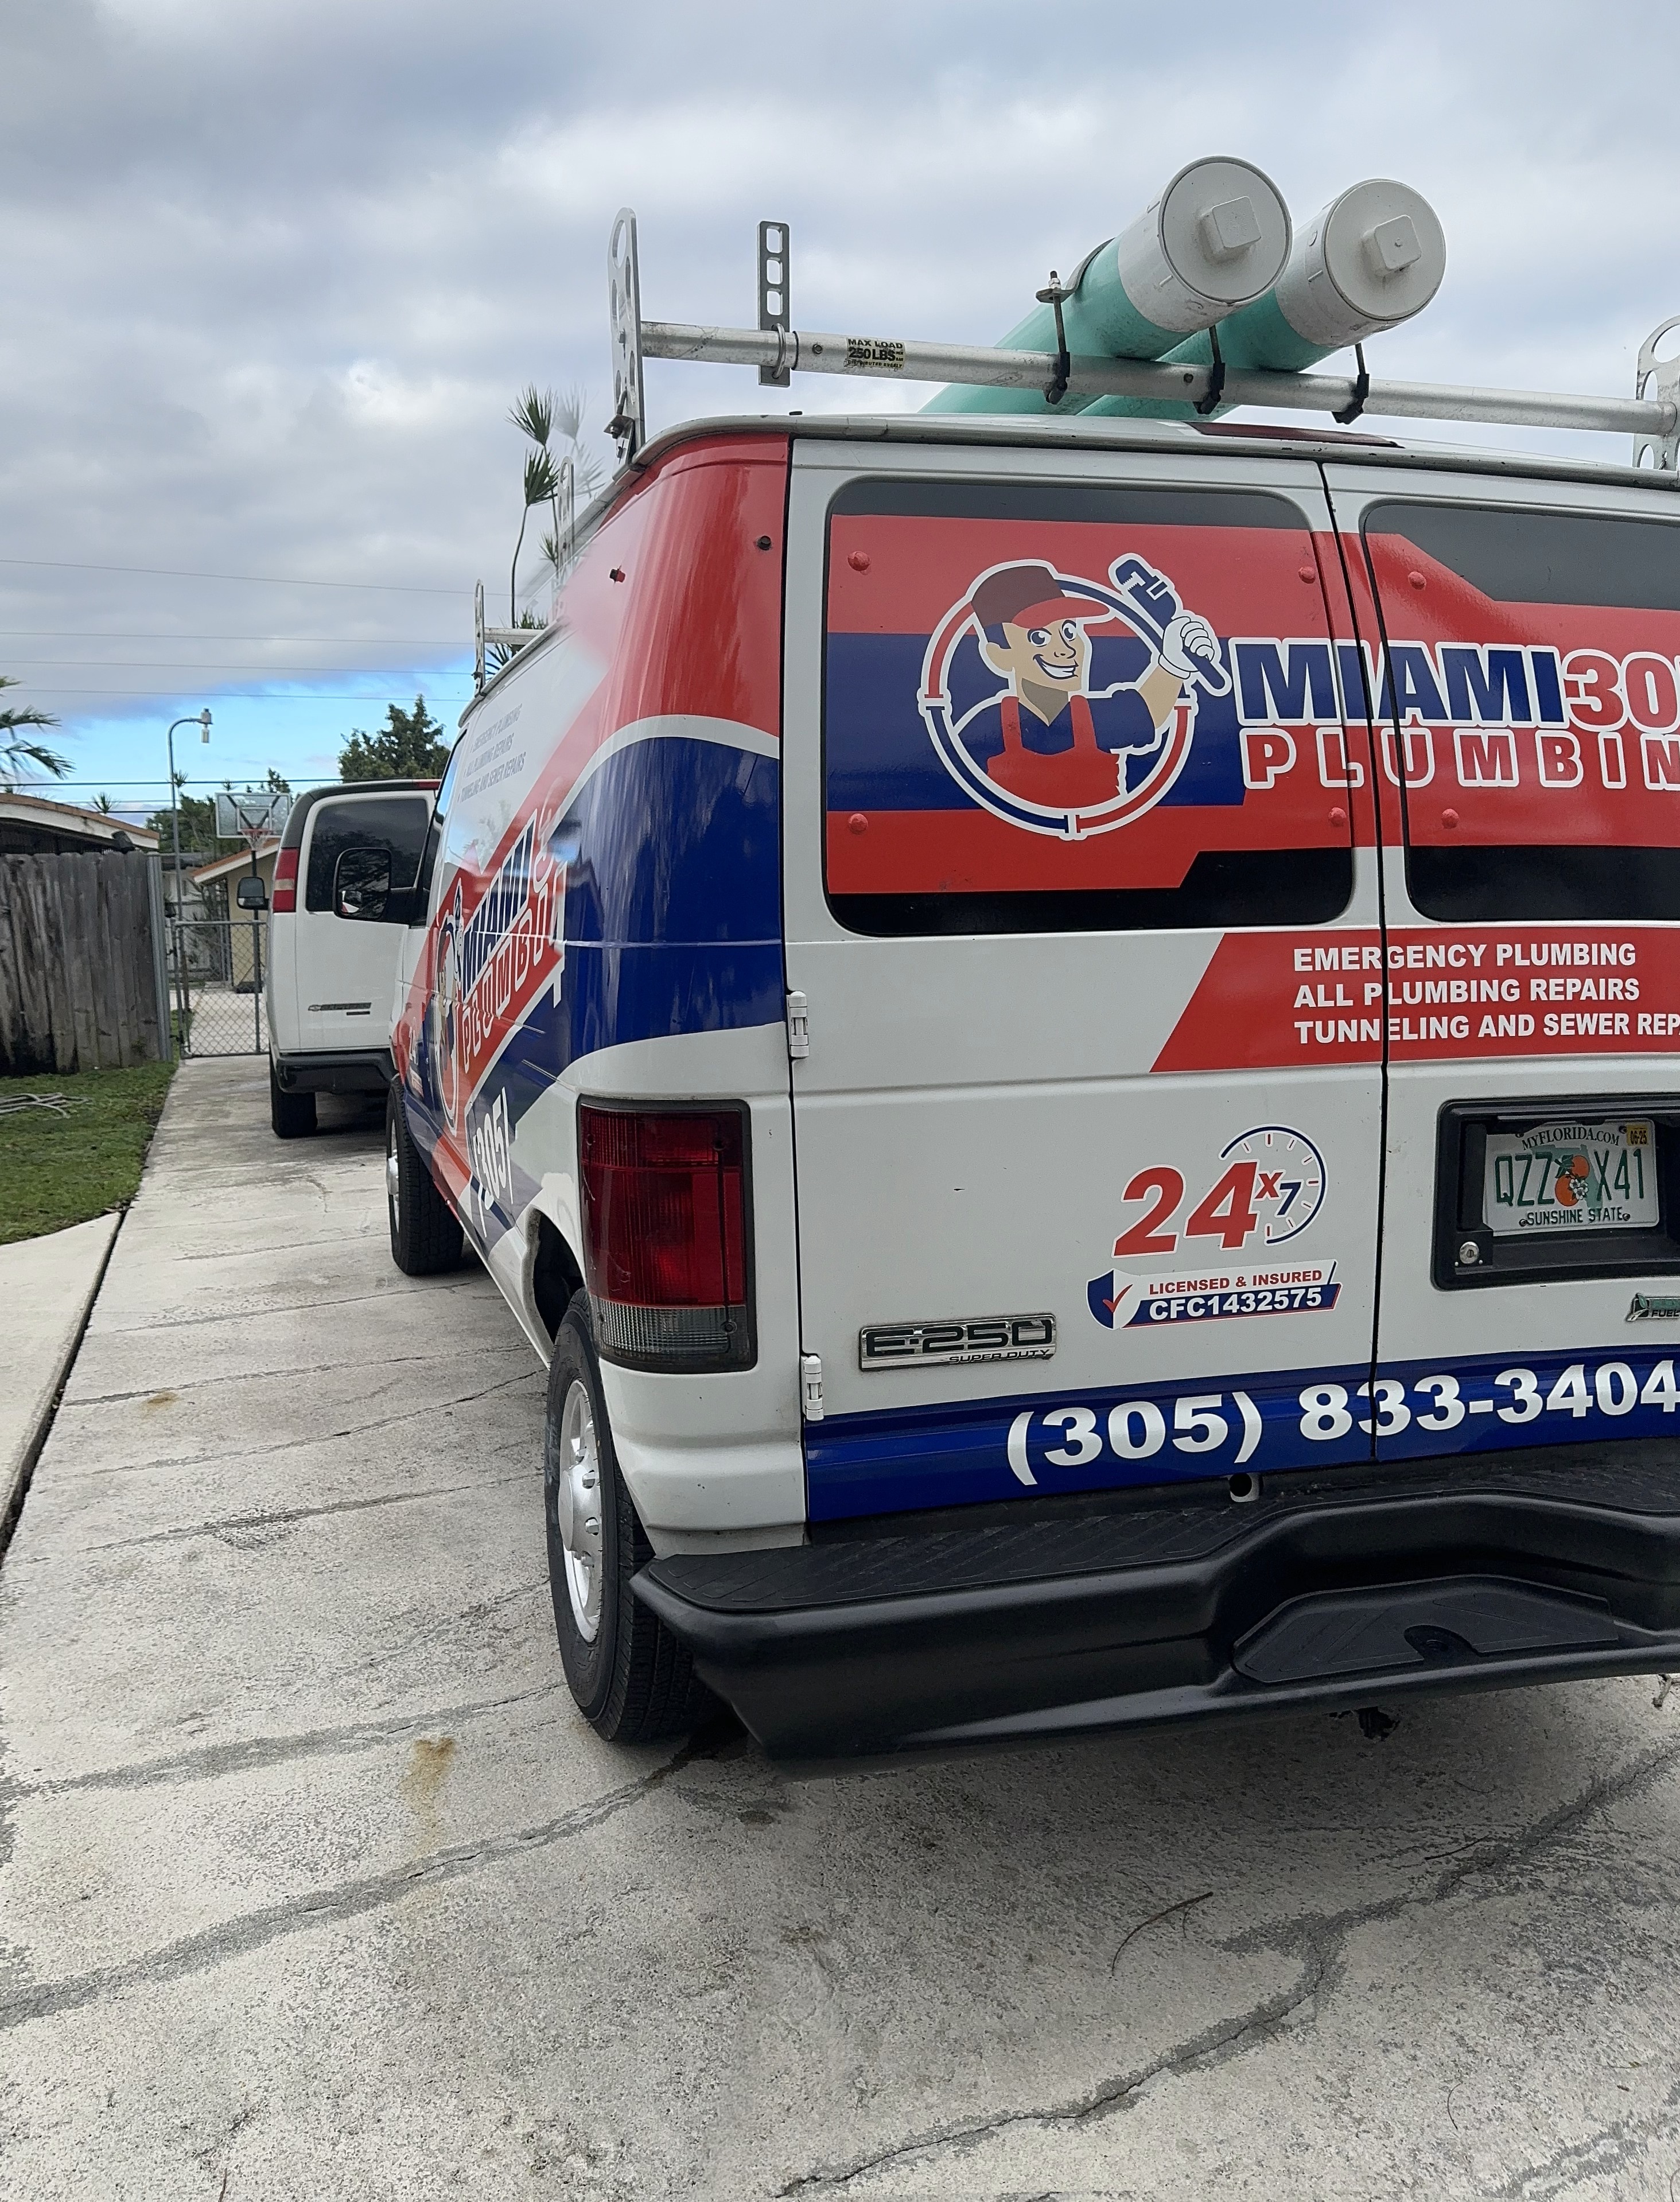 Plumbing Services in Miami - Photos of Our Business -  Miami 305 Plumbing